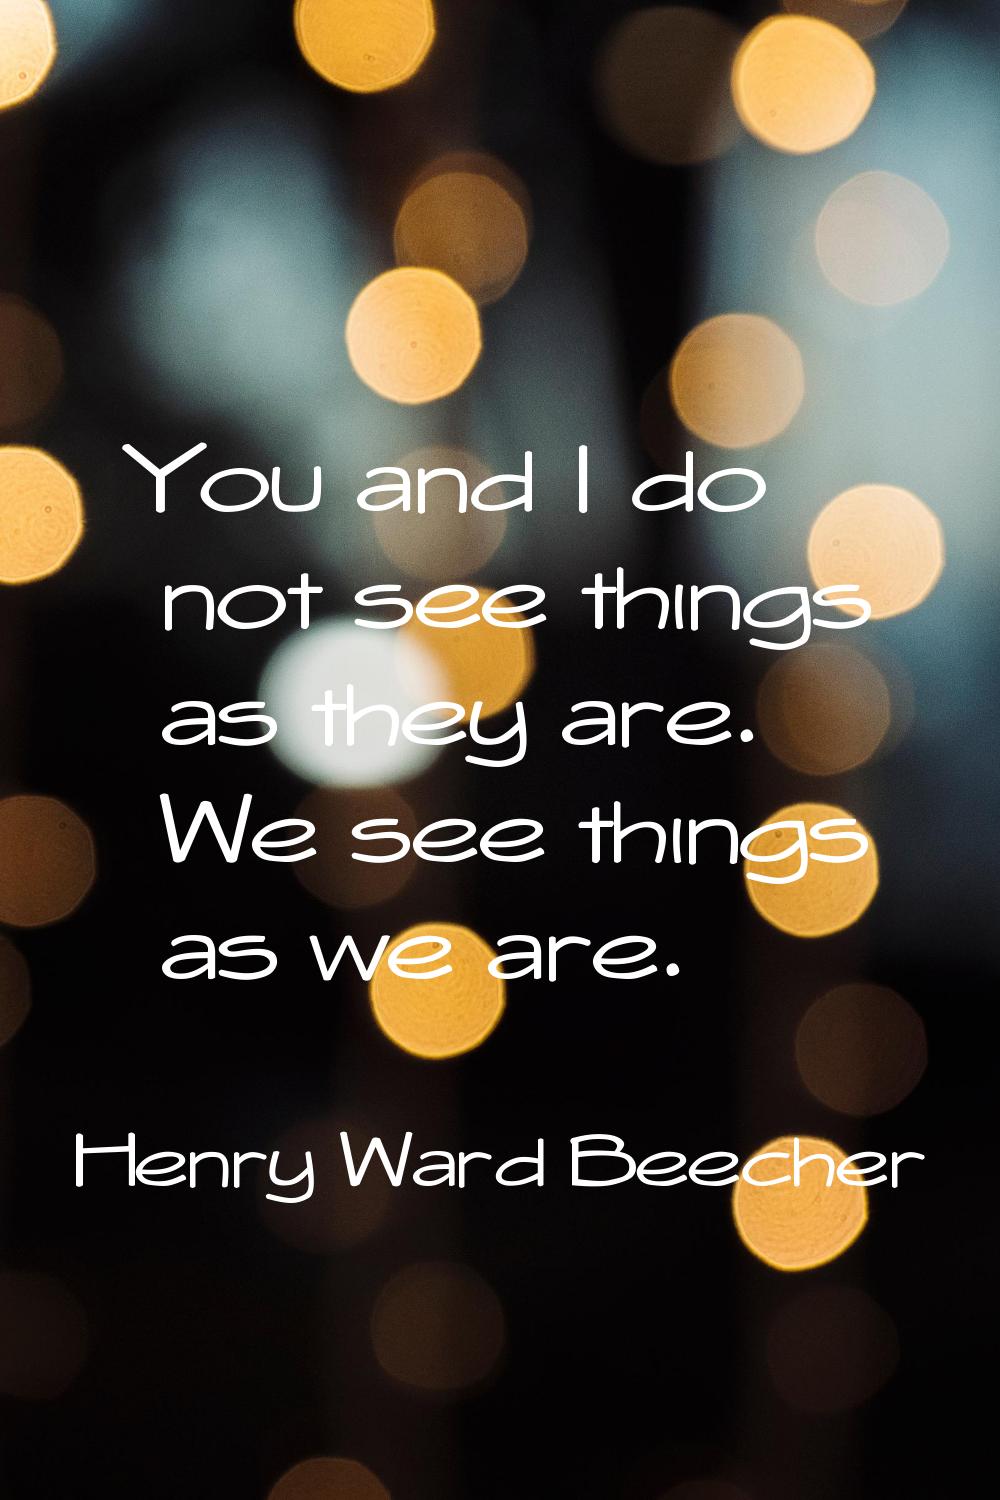 You and I do not see things as they are. We see things as we are.